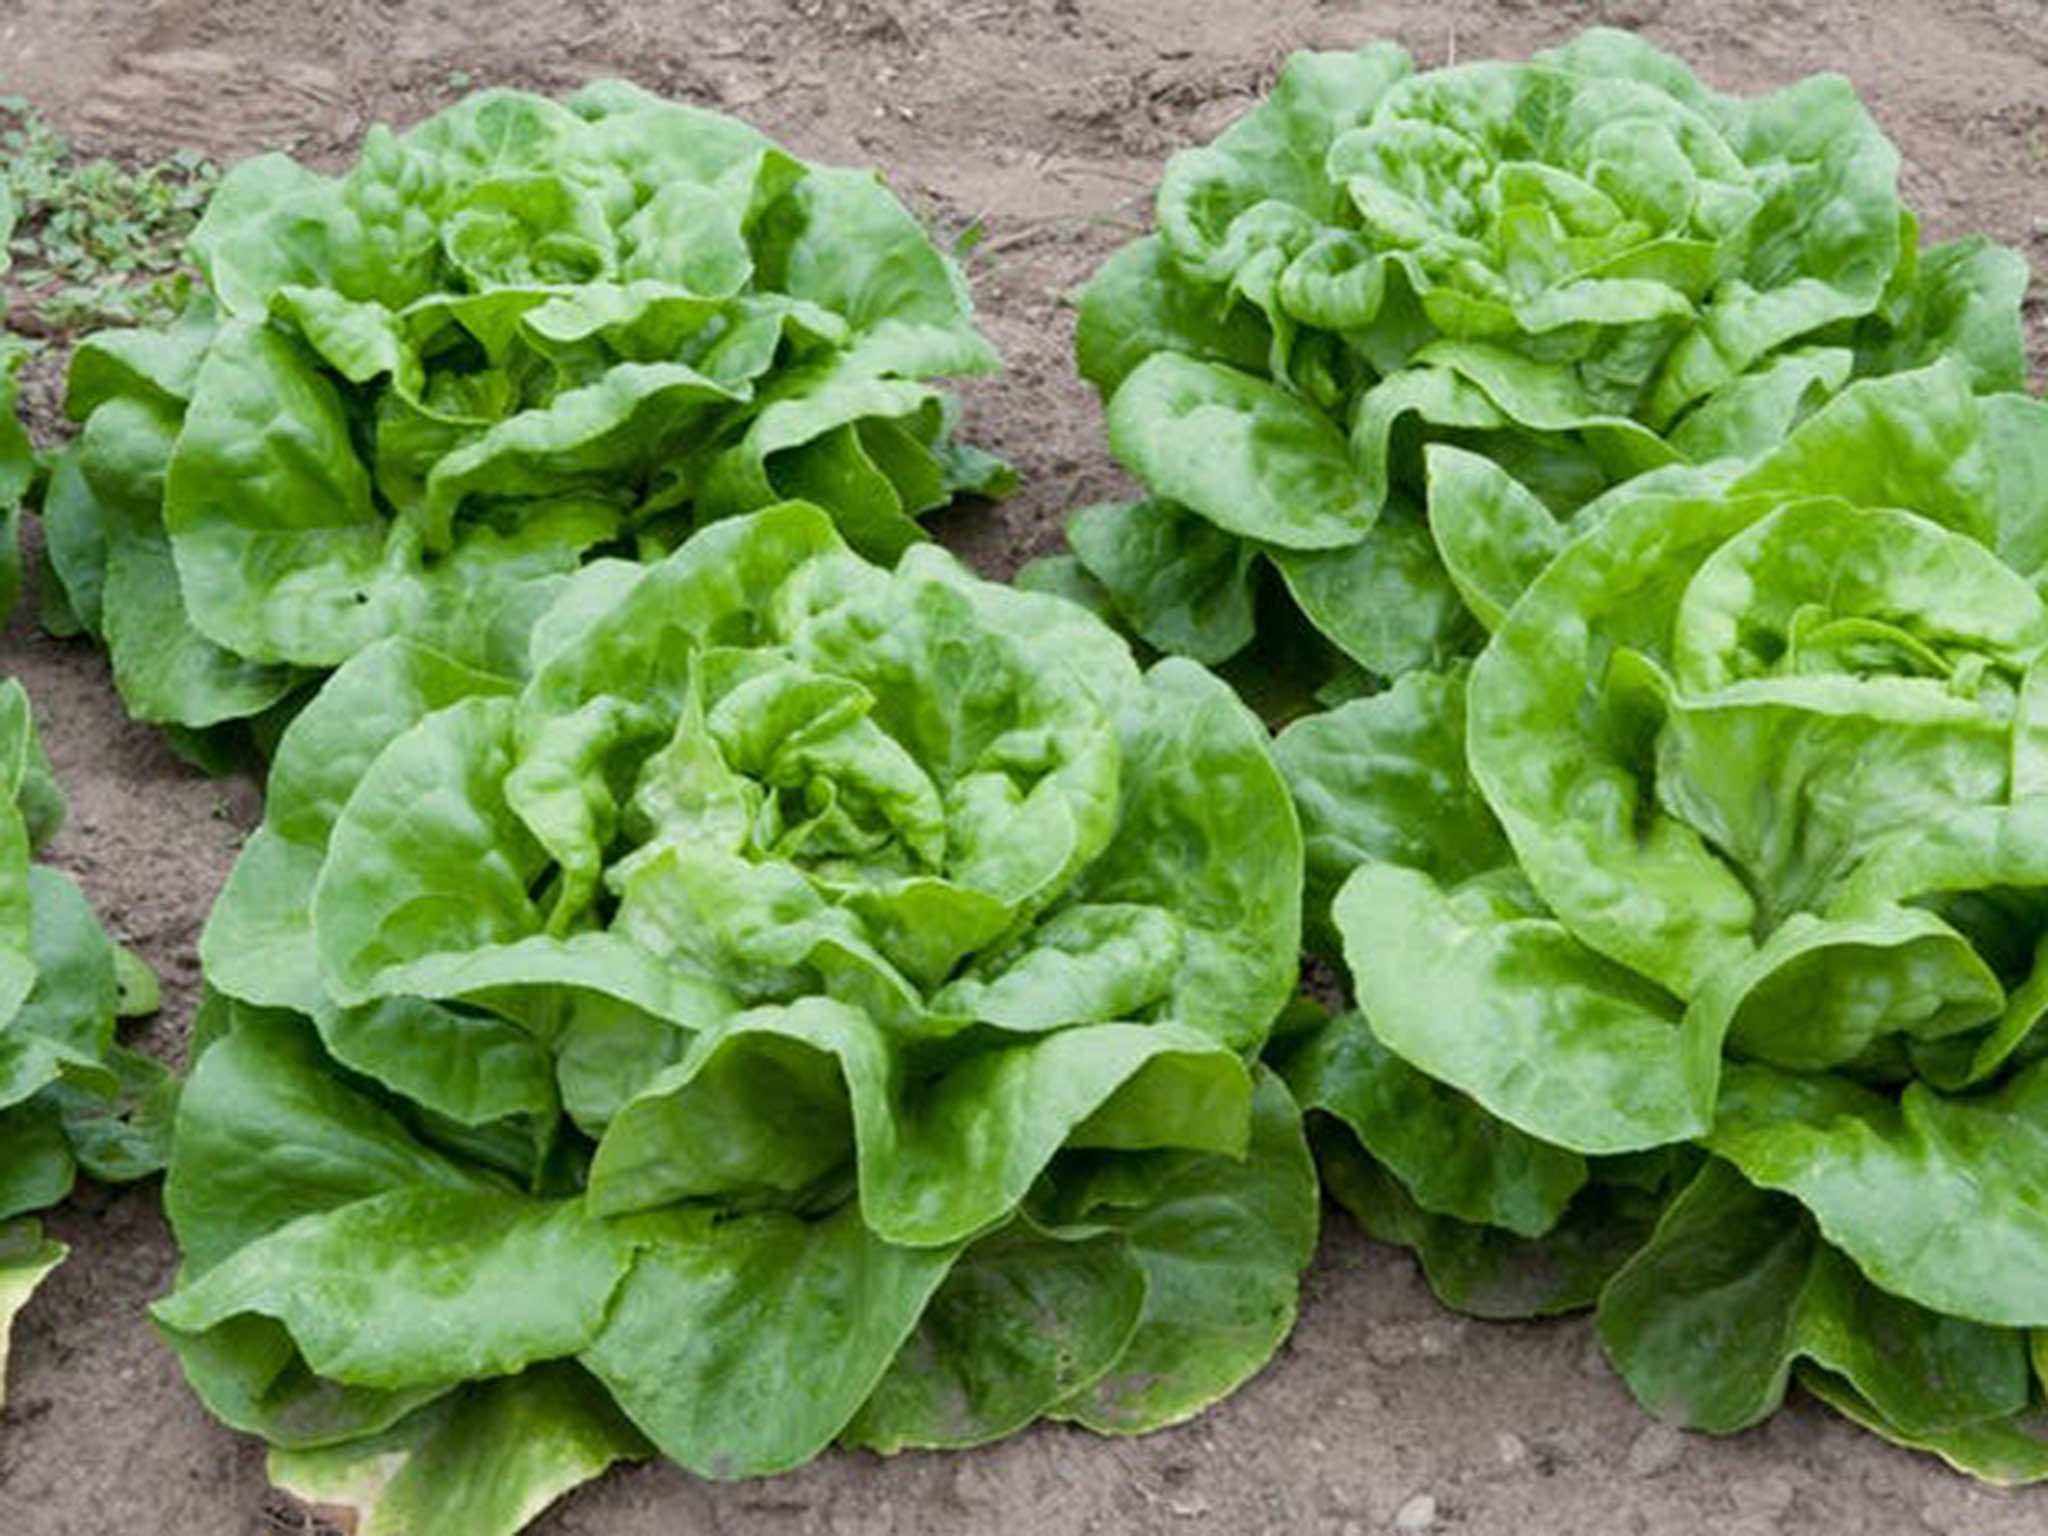 This summer’s high temperatures have already affected lettuce crops